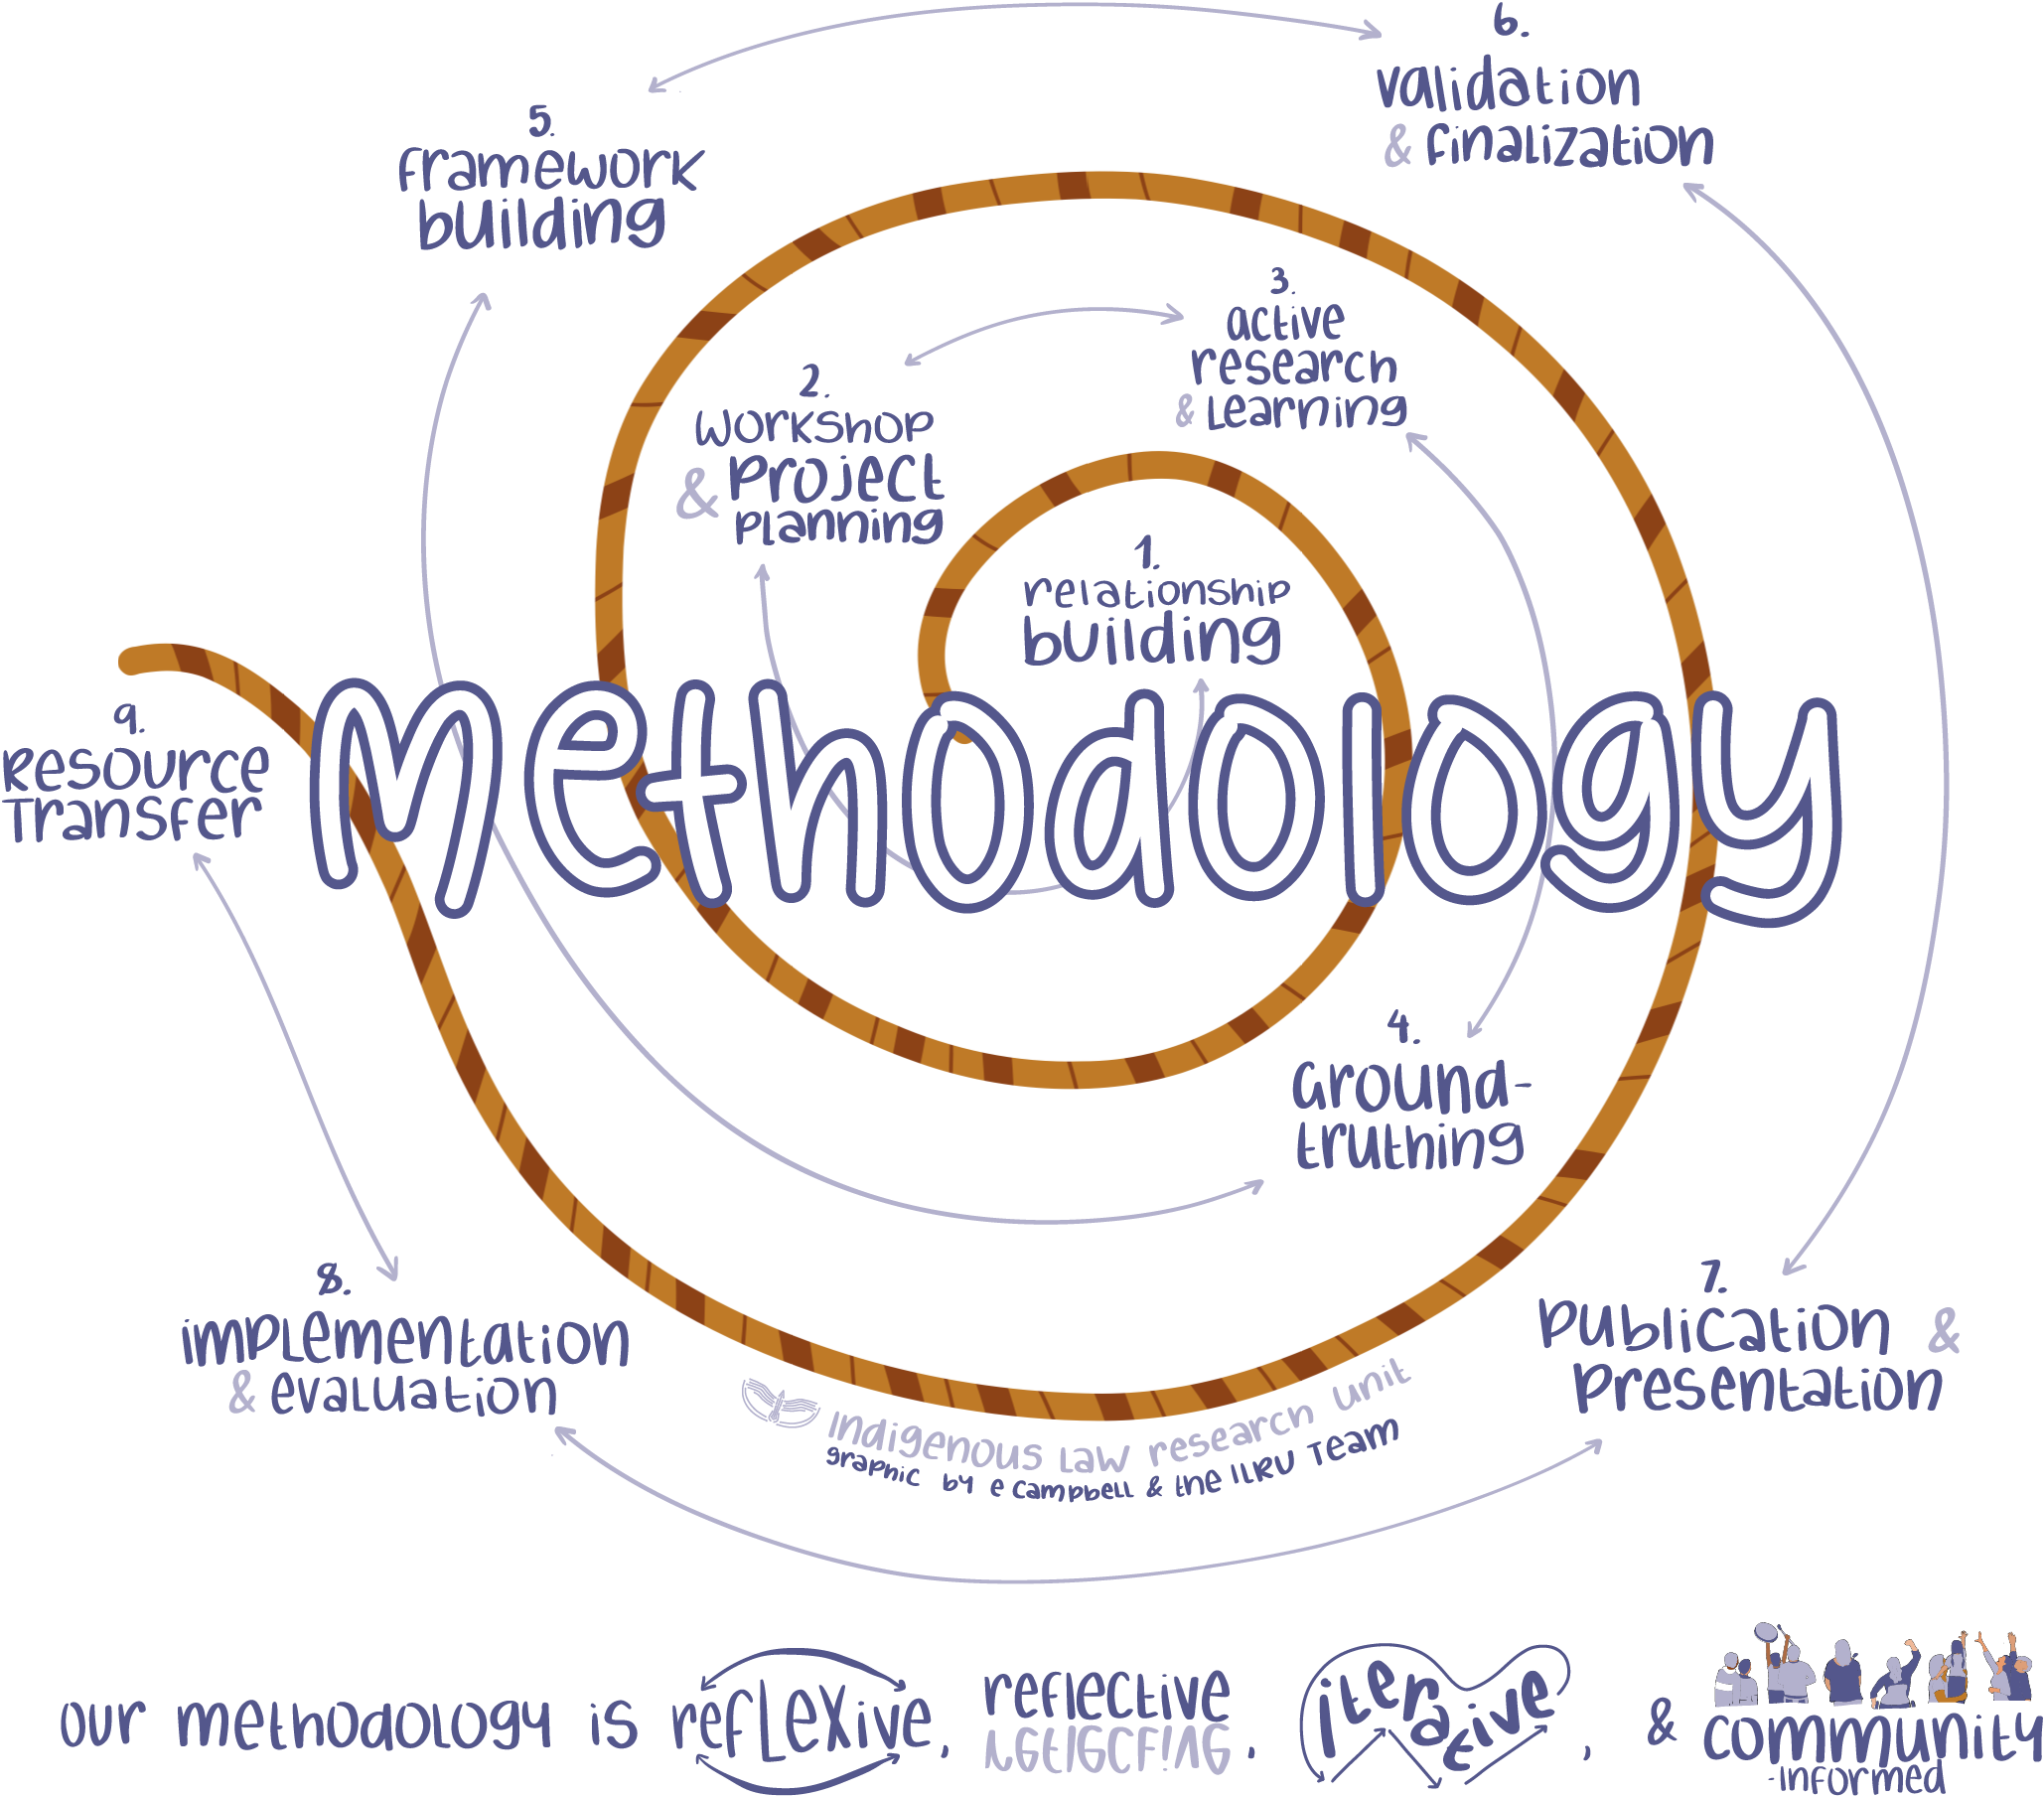 This is our methodology graphic. The Graphic has the word "Methodology" written across. It then includes the nine steps of ILRU's methodology moving outwards in a spiral: 1. Relationship Building; 2. Workshop Project & Planning; 3. Active Research & Learning; 4. Ground-Truthing; 5. Framework Building; 6. Validation * Finalization; 7. Publication & Presentation; 8. Implementation & Evaluation; 9. Resource Transfer